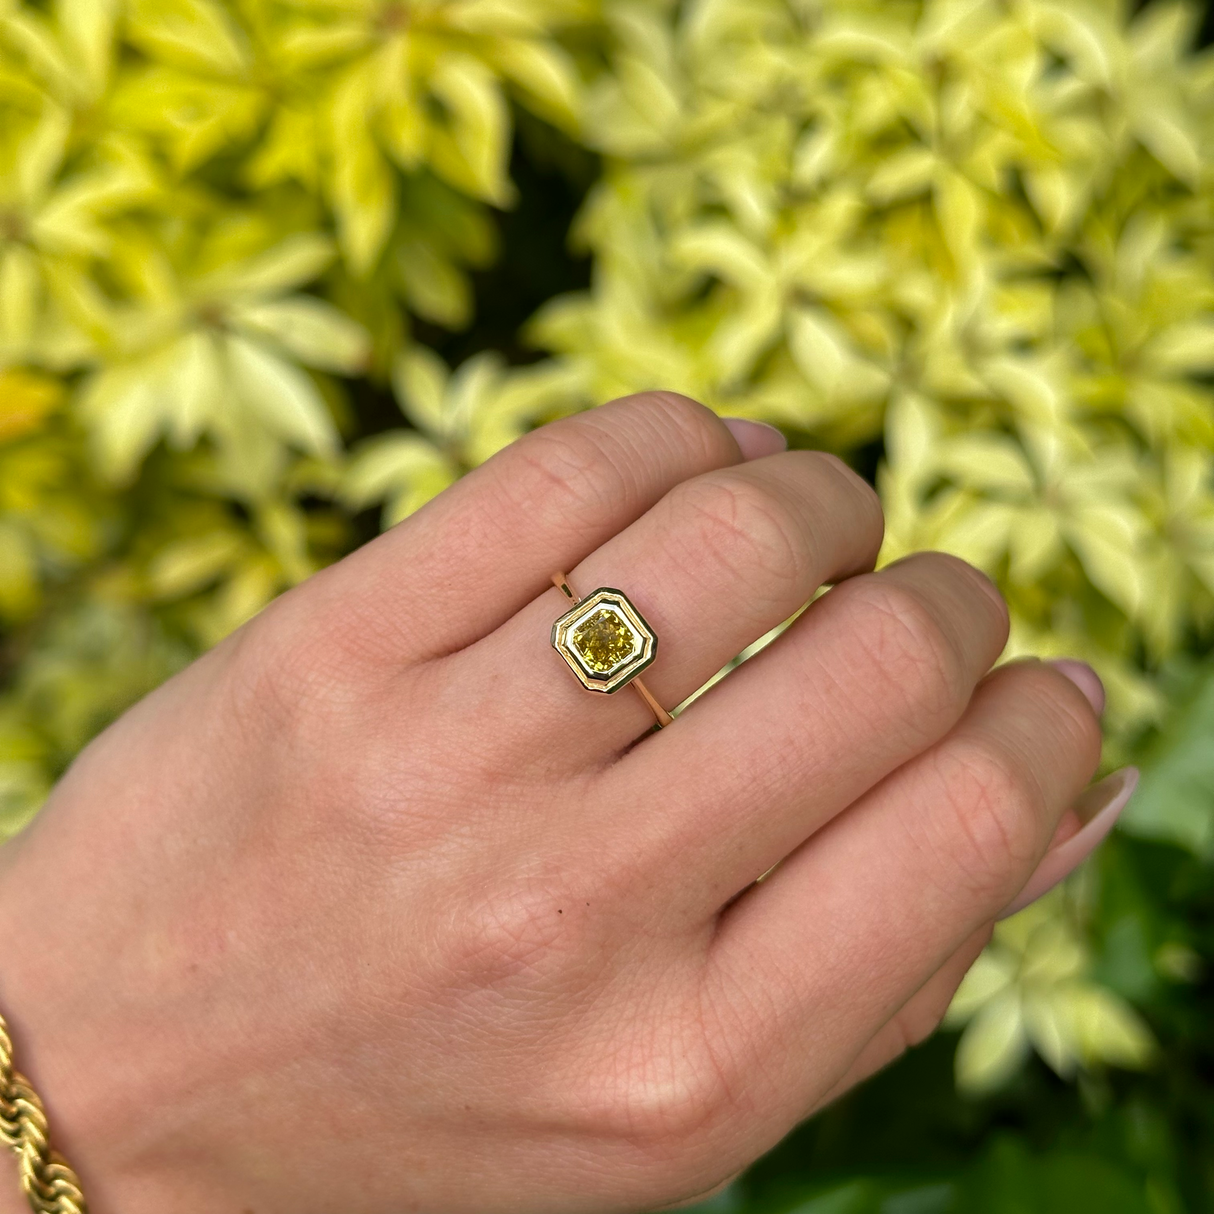  Vintage, Solitaire Yellow Diamond Ring, 14ct Yellow and White Gold worn on hand.